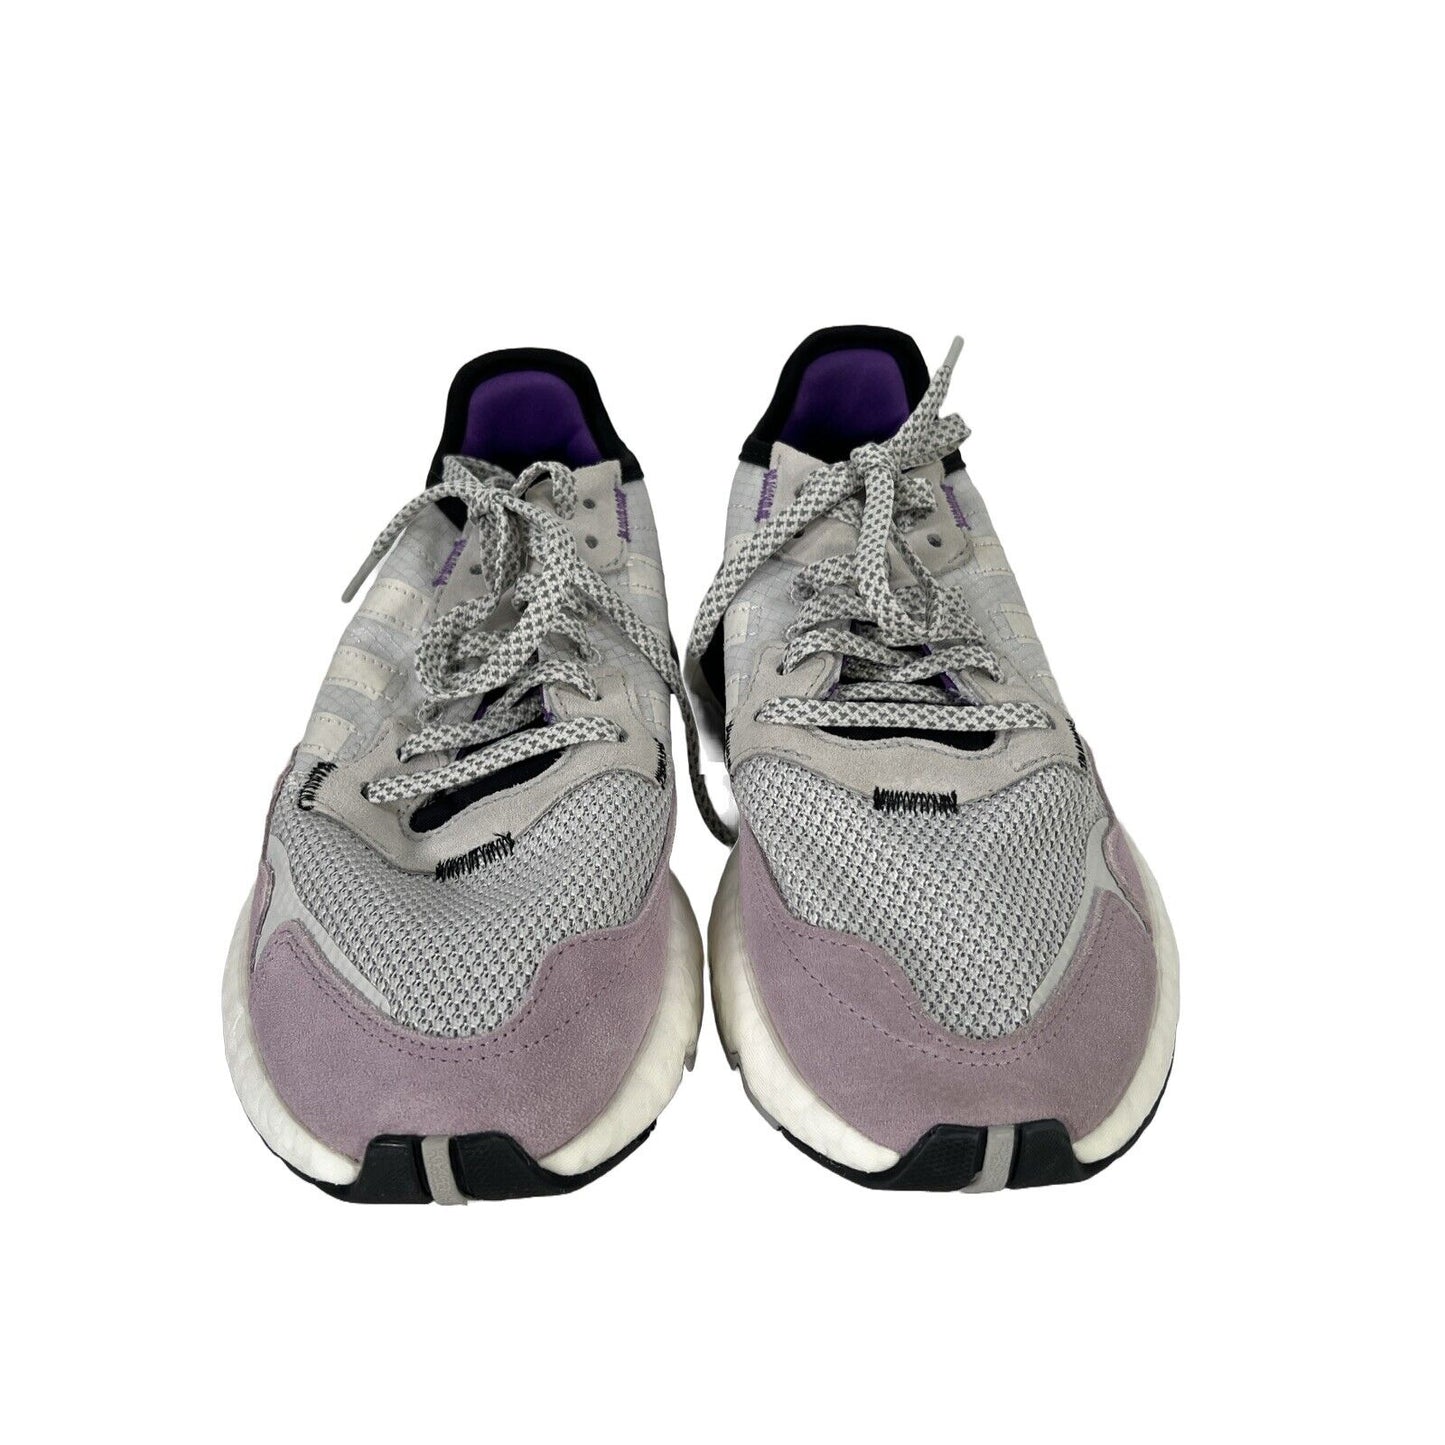 Adidas Women's Purple/Gray Nite Jogger Lace Up Athletic Shoes - 6.5